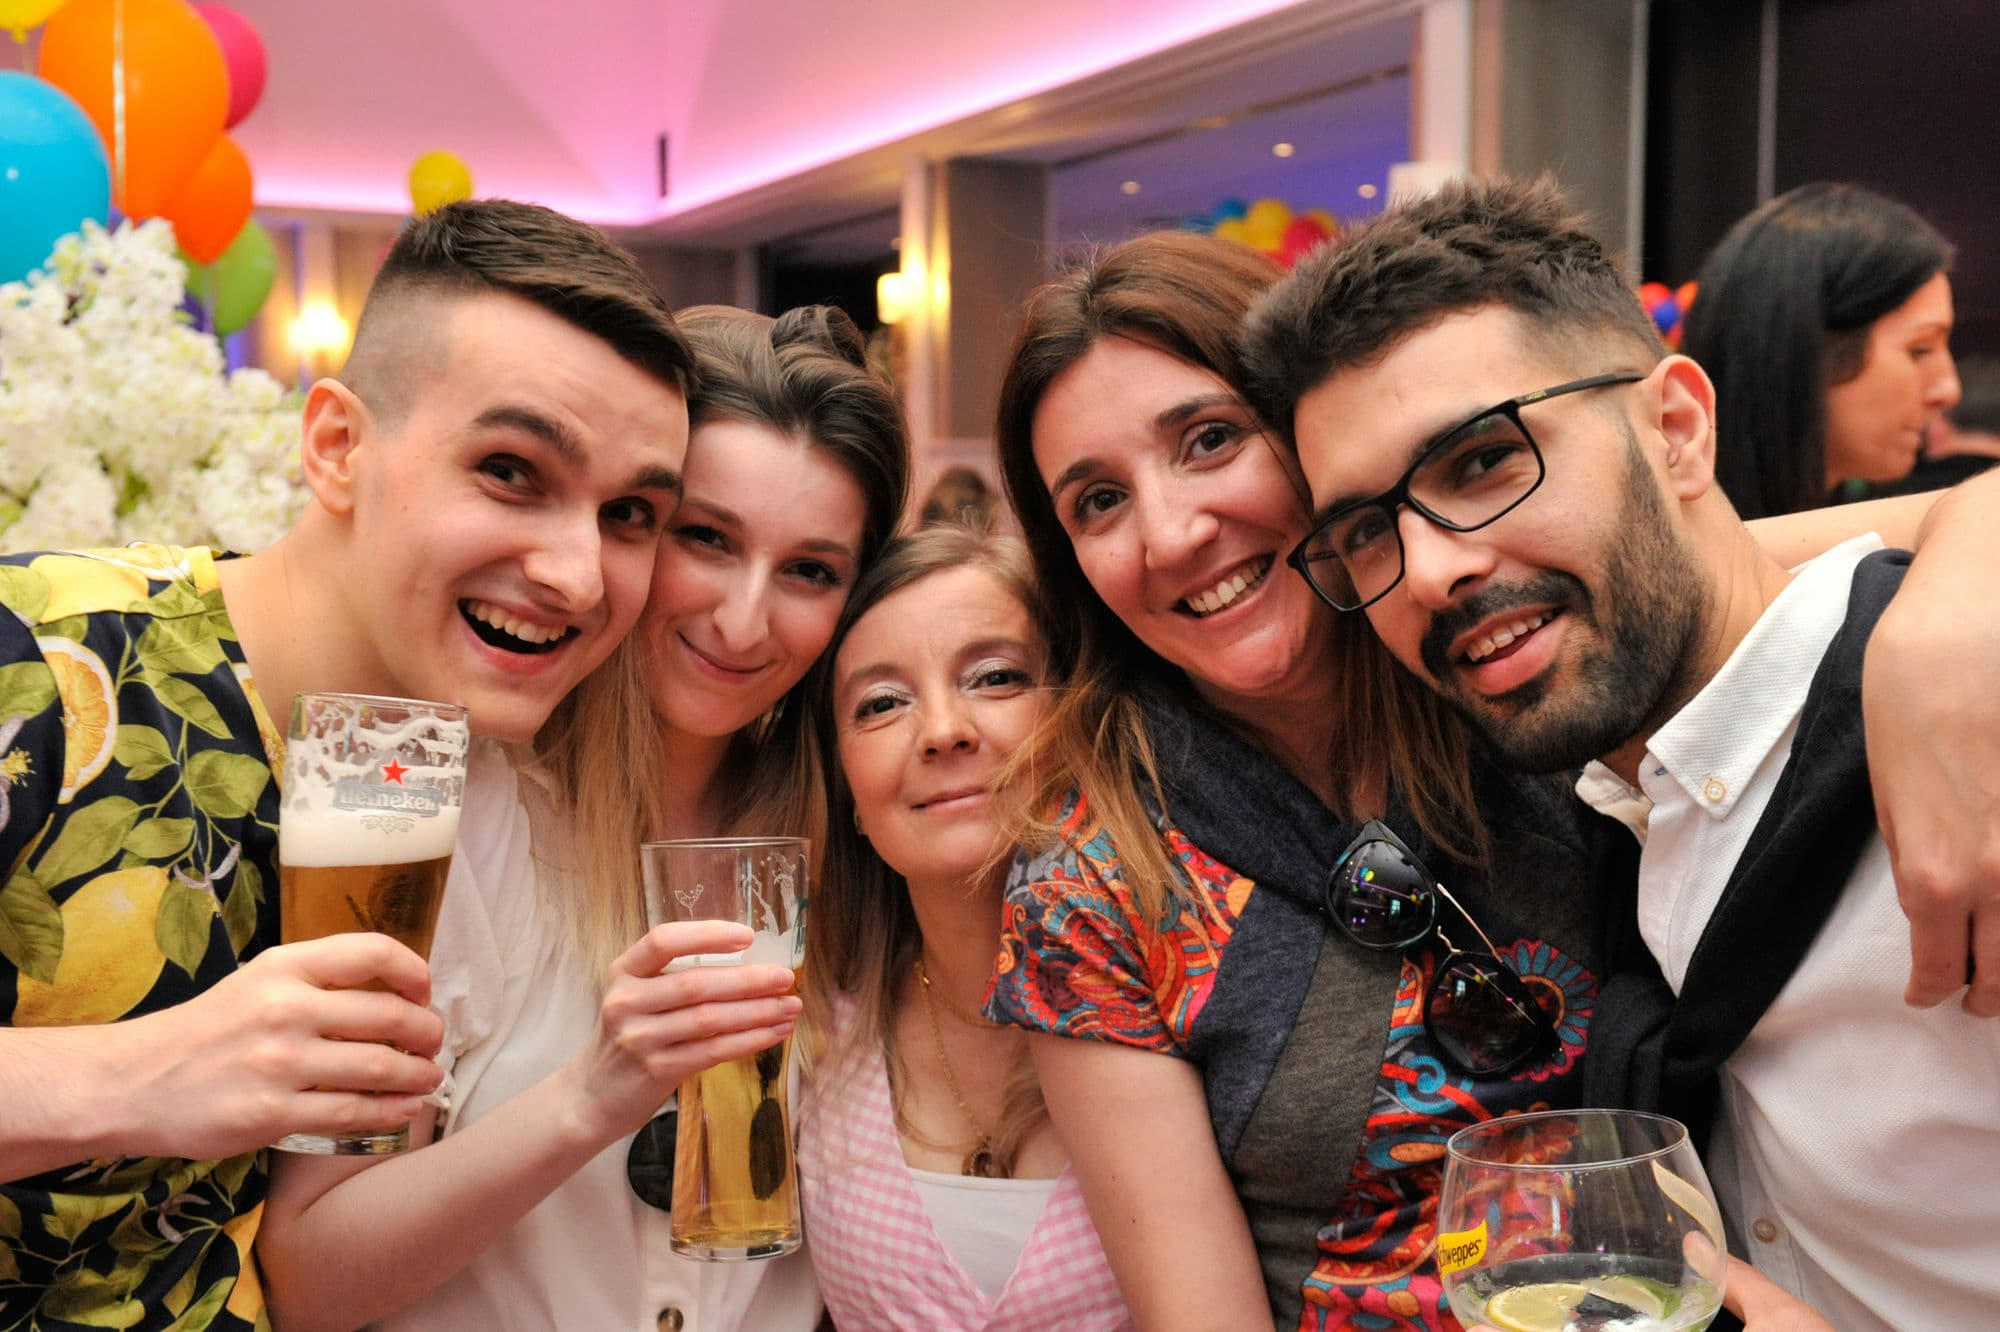 A group of young and happy Irish tech employees are enjoying themselves at a company work party in Dublin